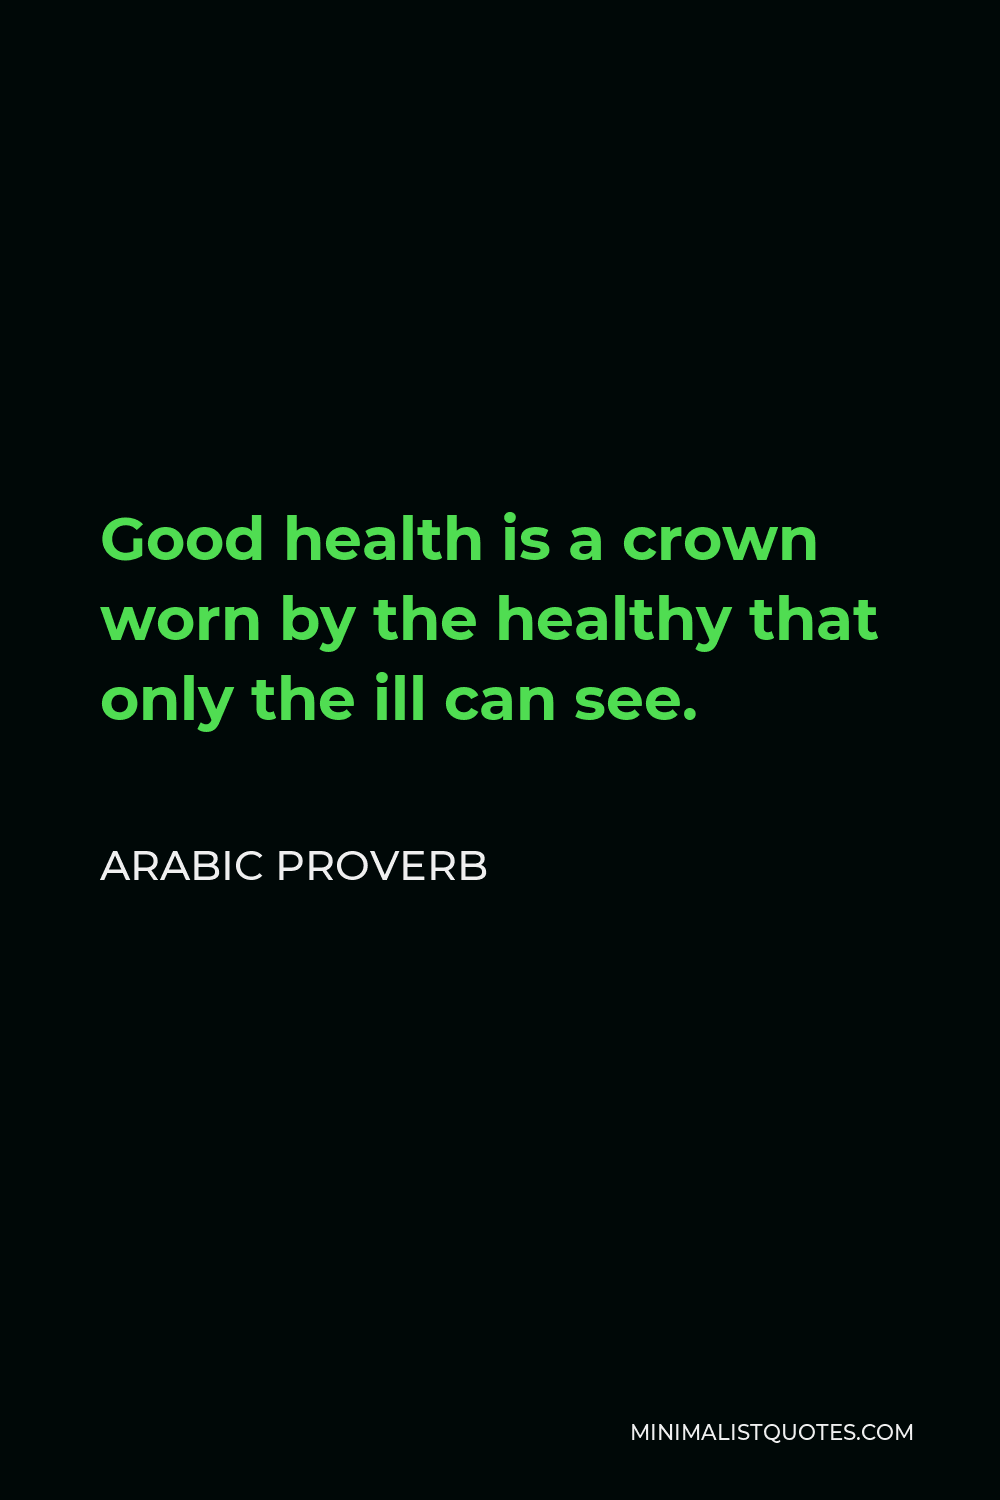 Arabic Proverb Quote - Good health is a crown worn by the healthy that only the ill can see.